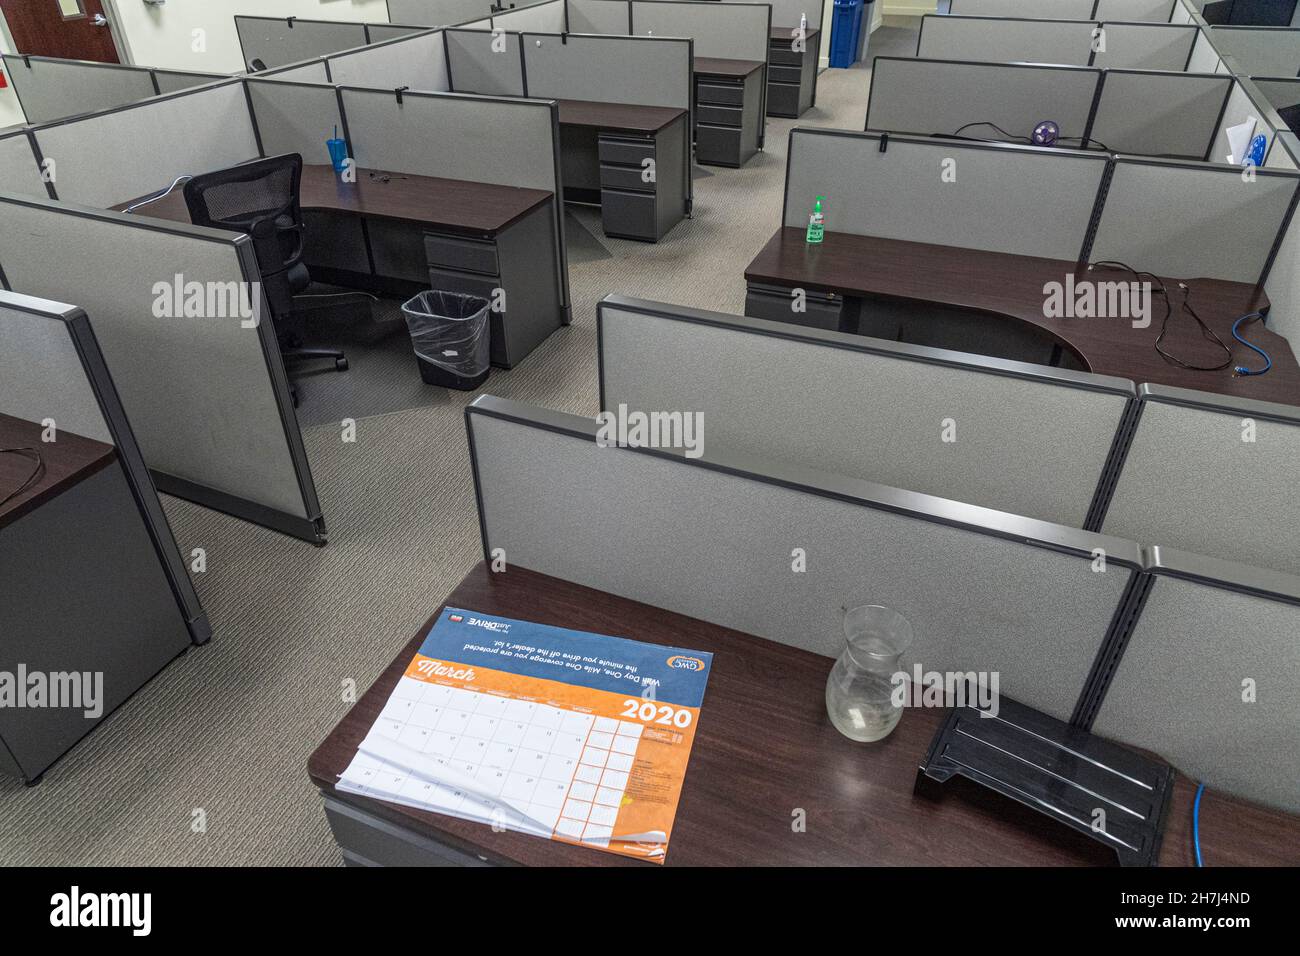 A calendar with the date March 2020, the start of the pandemic, showing in empty office workplace, Philadelphia Pennsylvania, USA Stock Photo